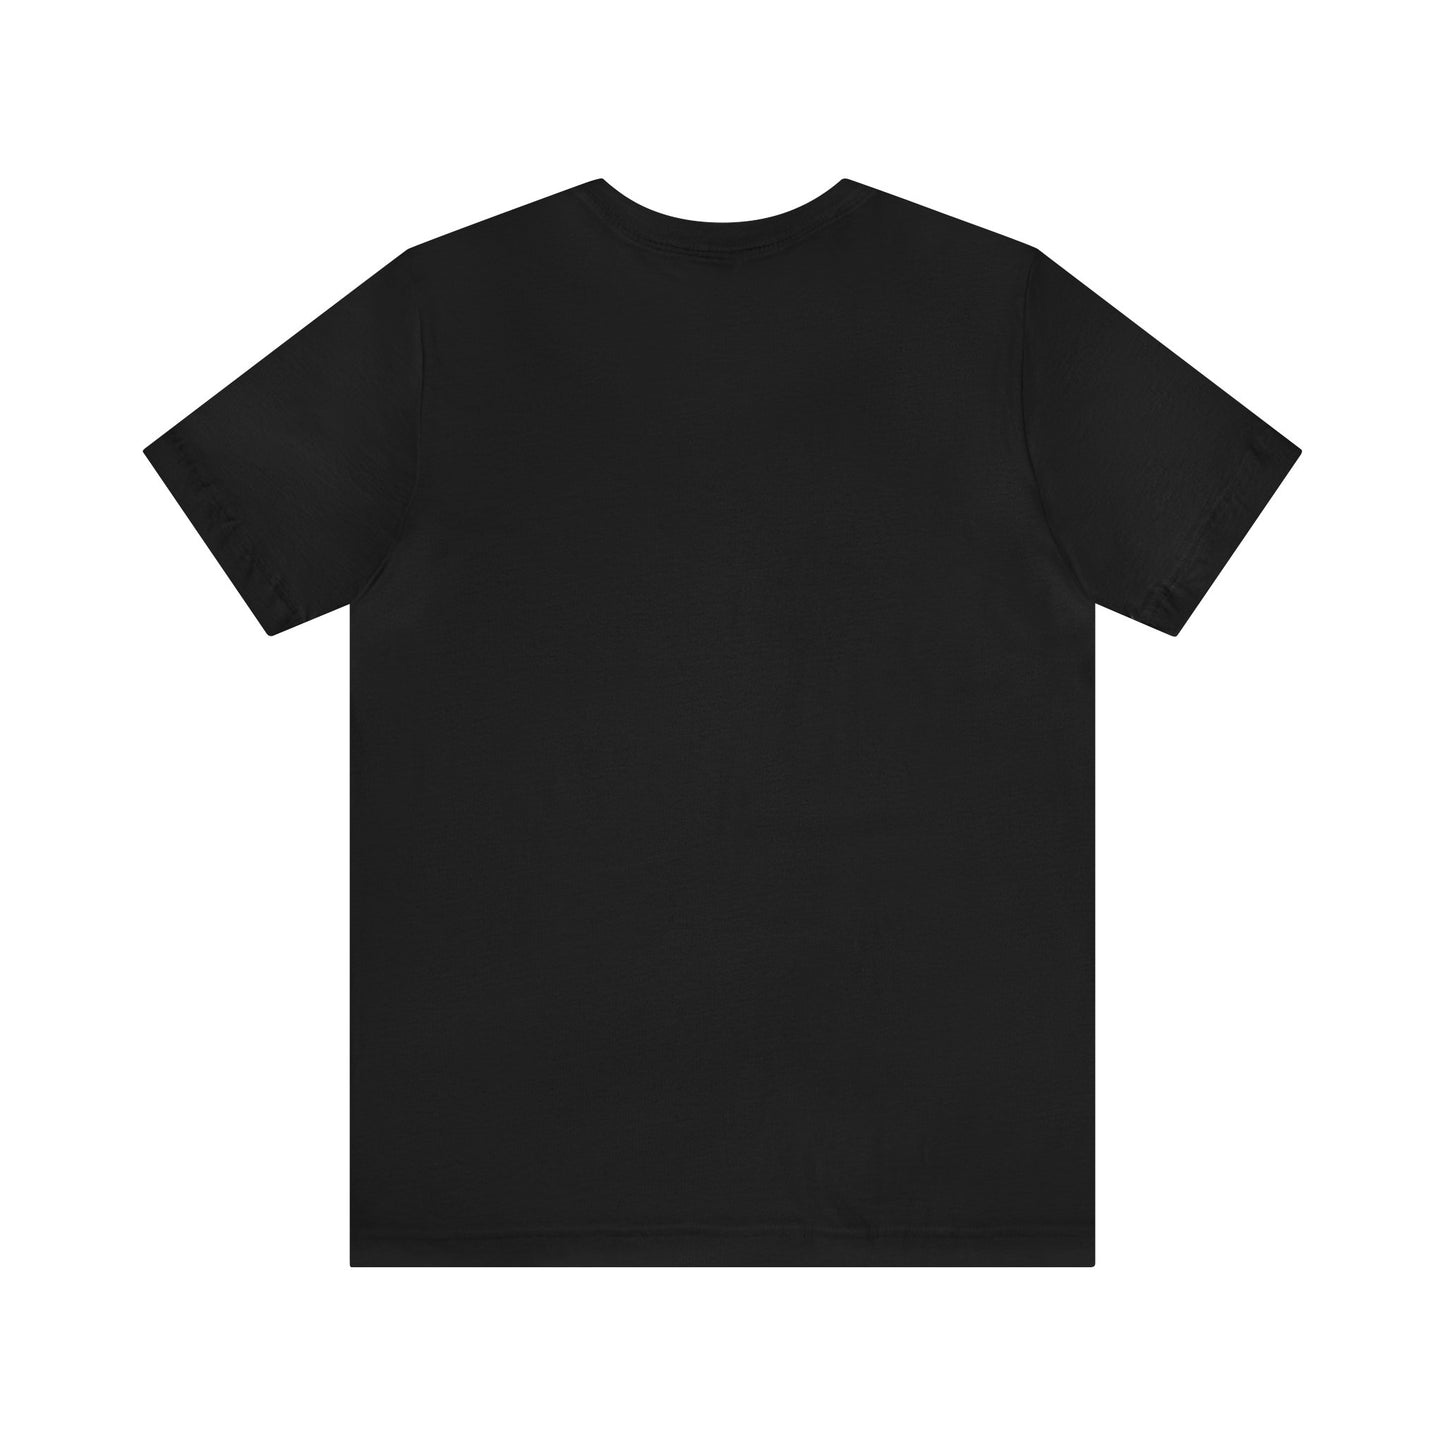 Young Gifted & Black - Bella Canvas -  Unisex Jersey Short Sleeve Tee